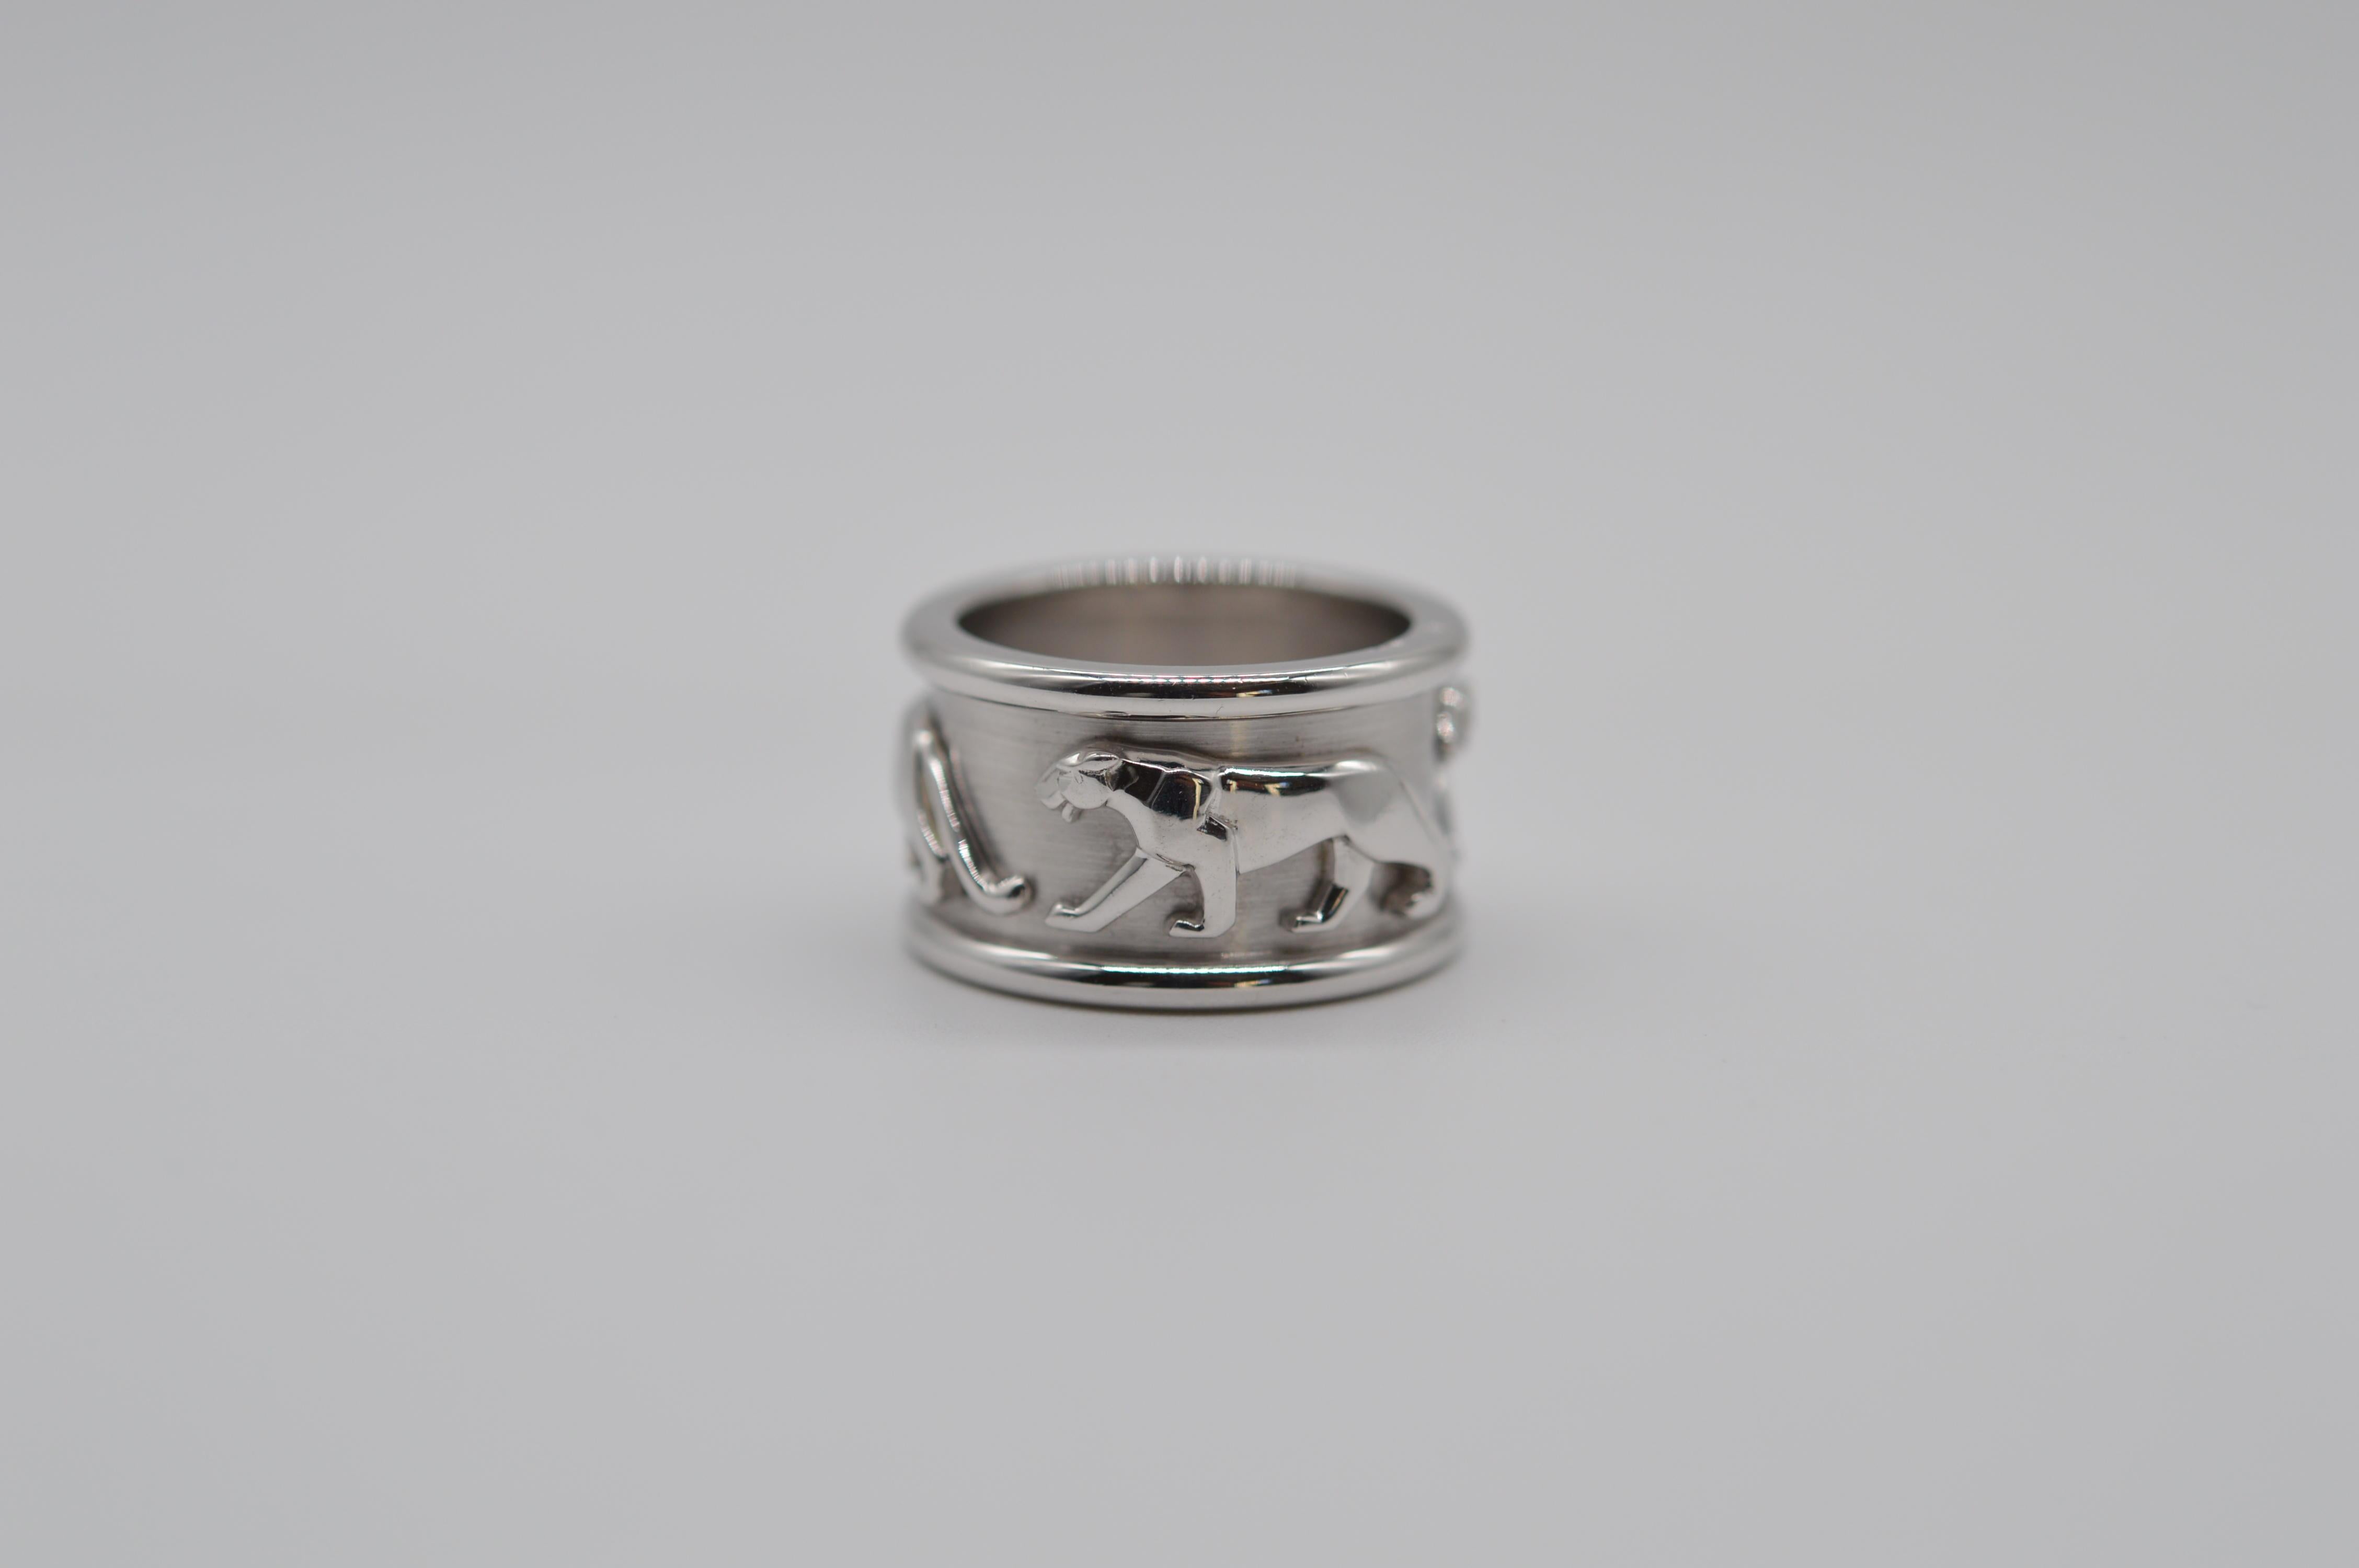 Cartier Panthère Ring
18K White Gold
Size 51
Weight 12.7 grams
Vintage unworn condition
With original certificate from Cartier
From 1999